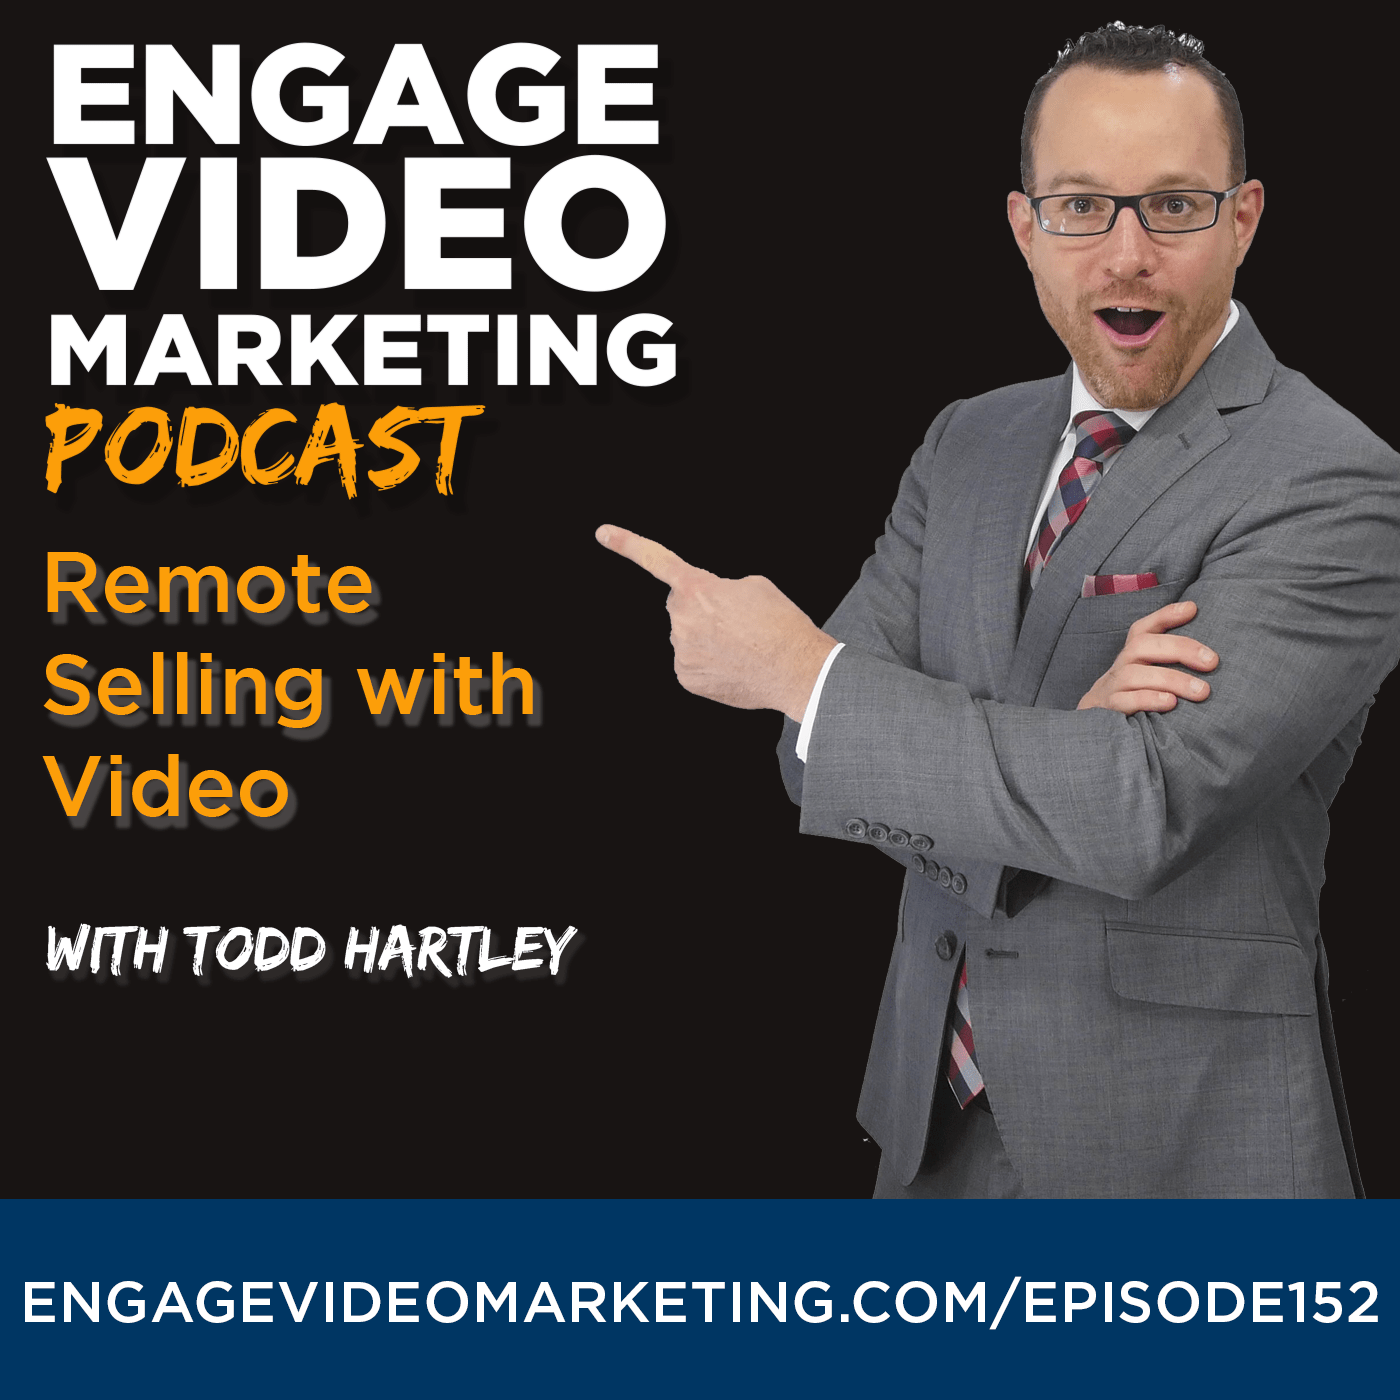 Remote Selling with Video with Todd Hartley